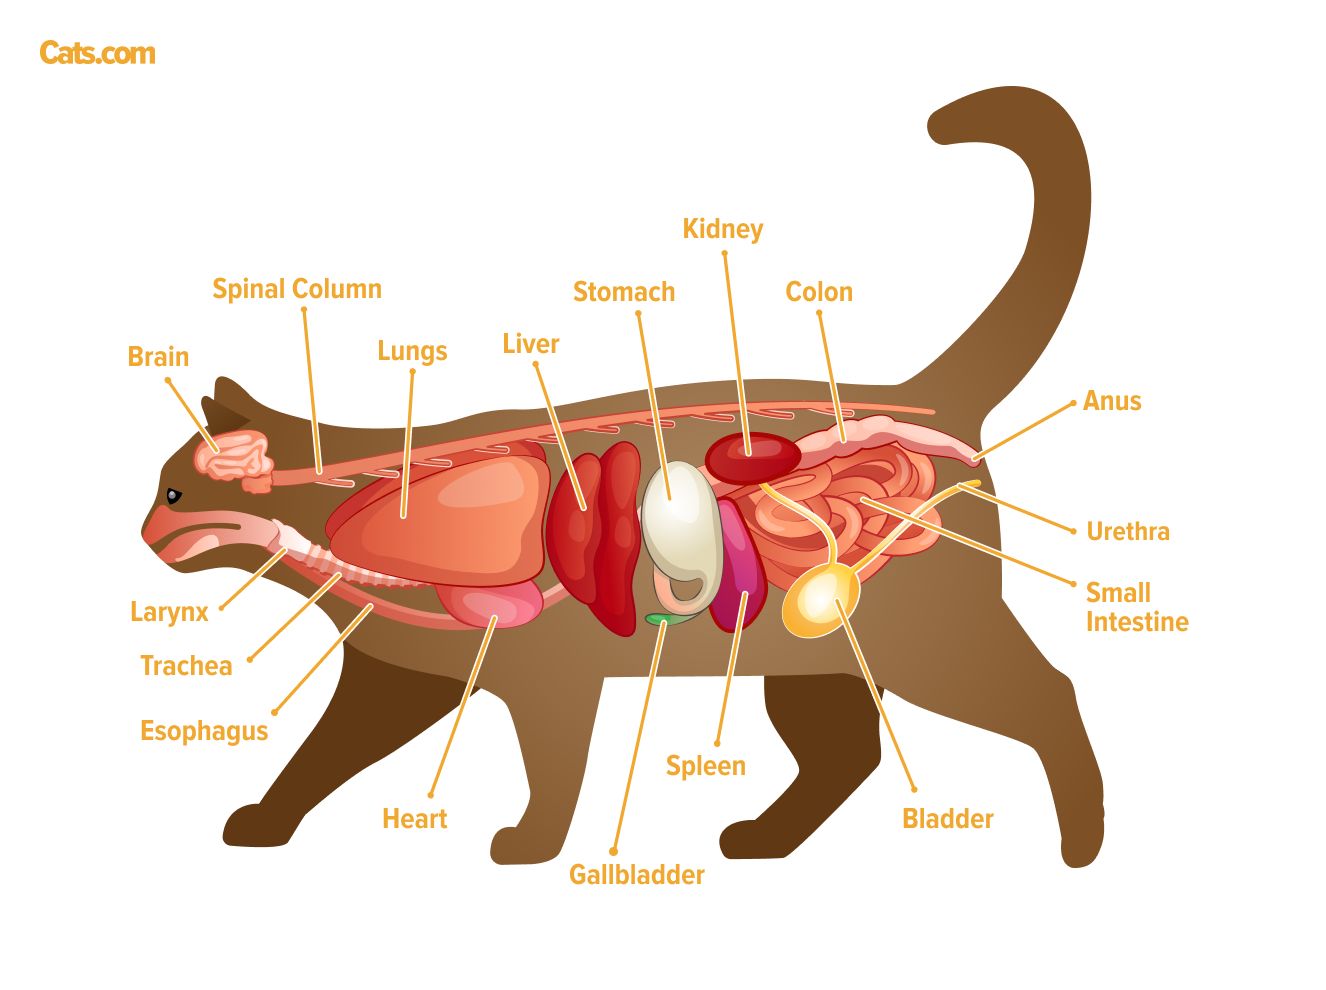 An image related to feline organs, possibly illustrating the anatomy of a cat's internal organs.